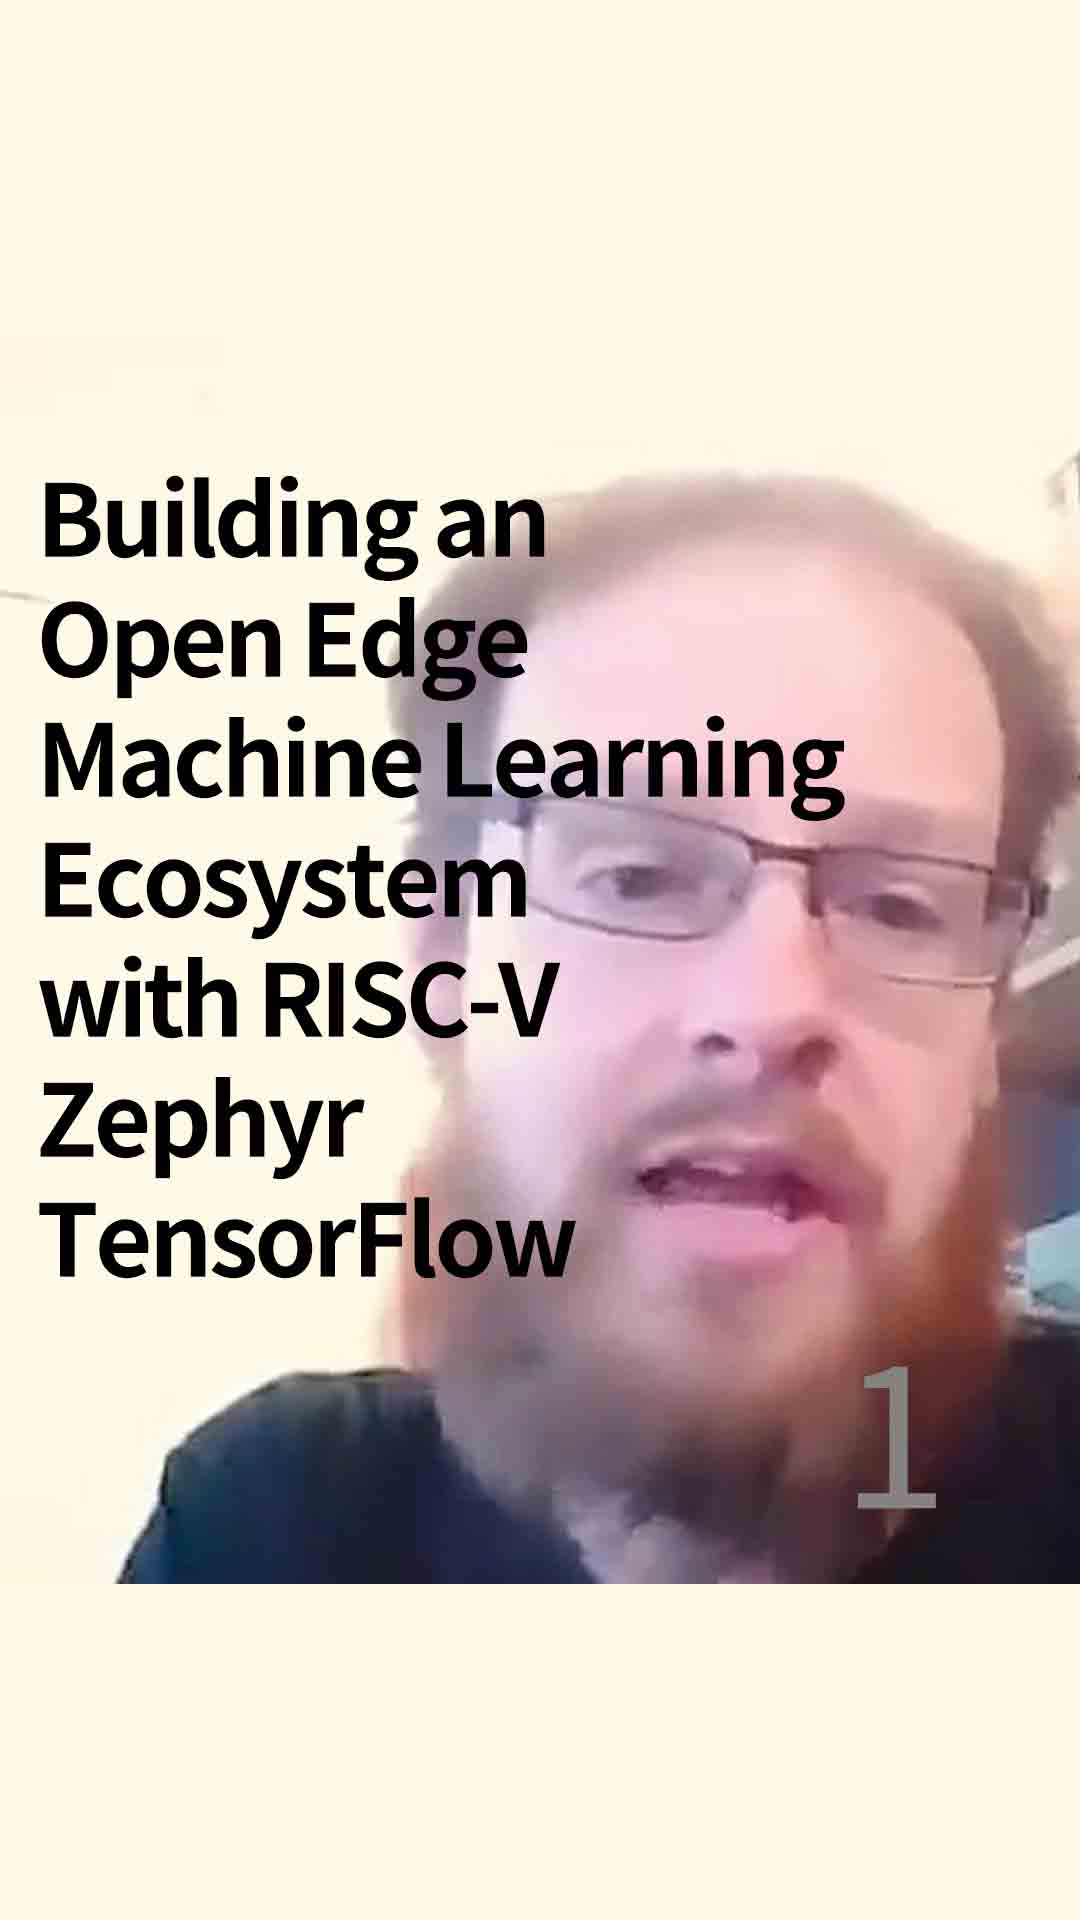 Building an Open Edge  Ecosystem with RISC-V#RISC-V 